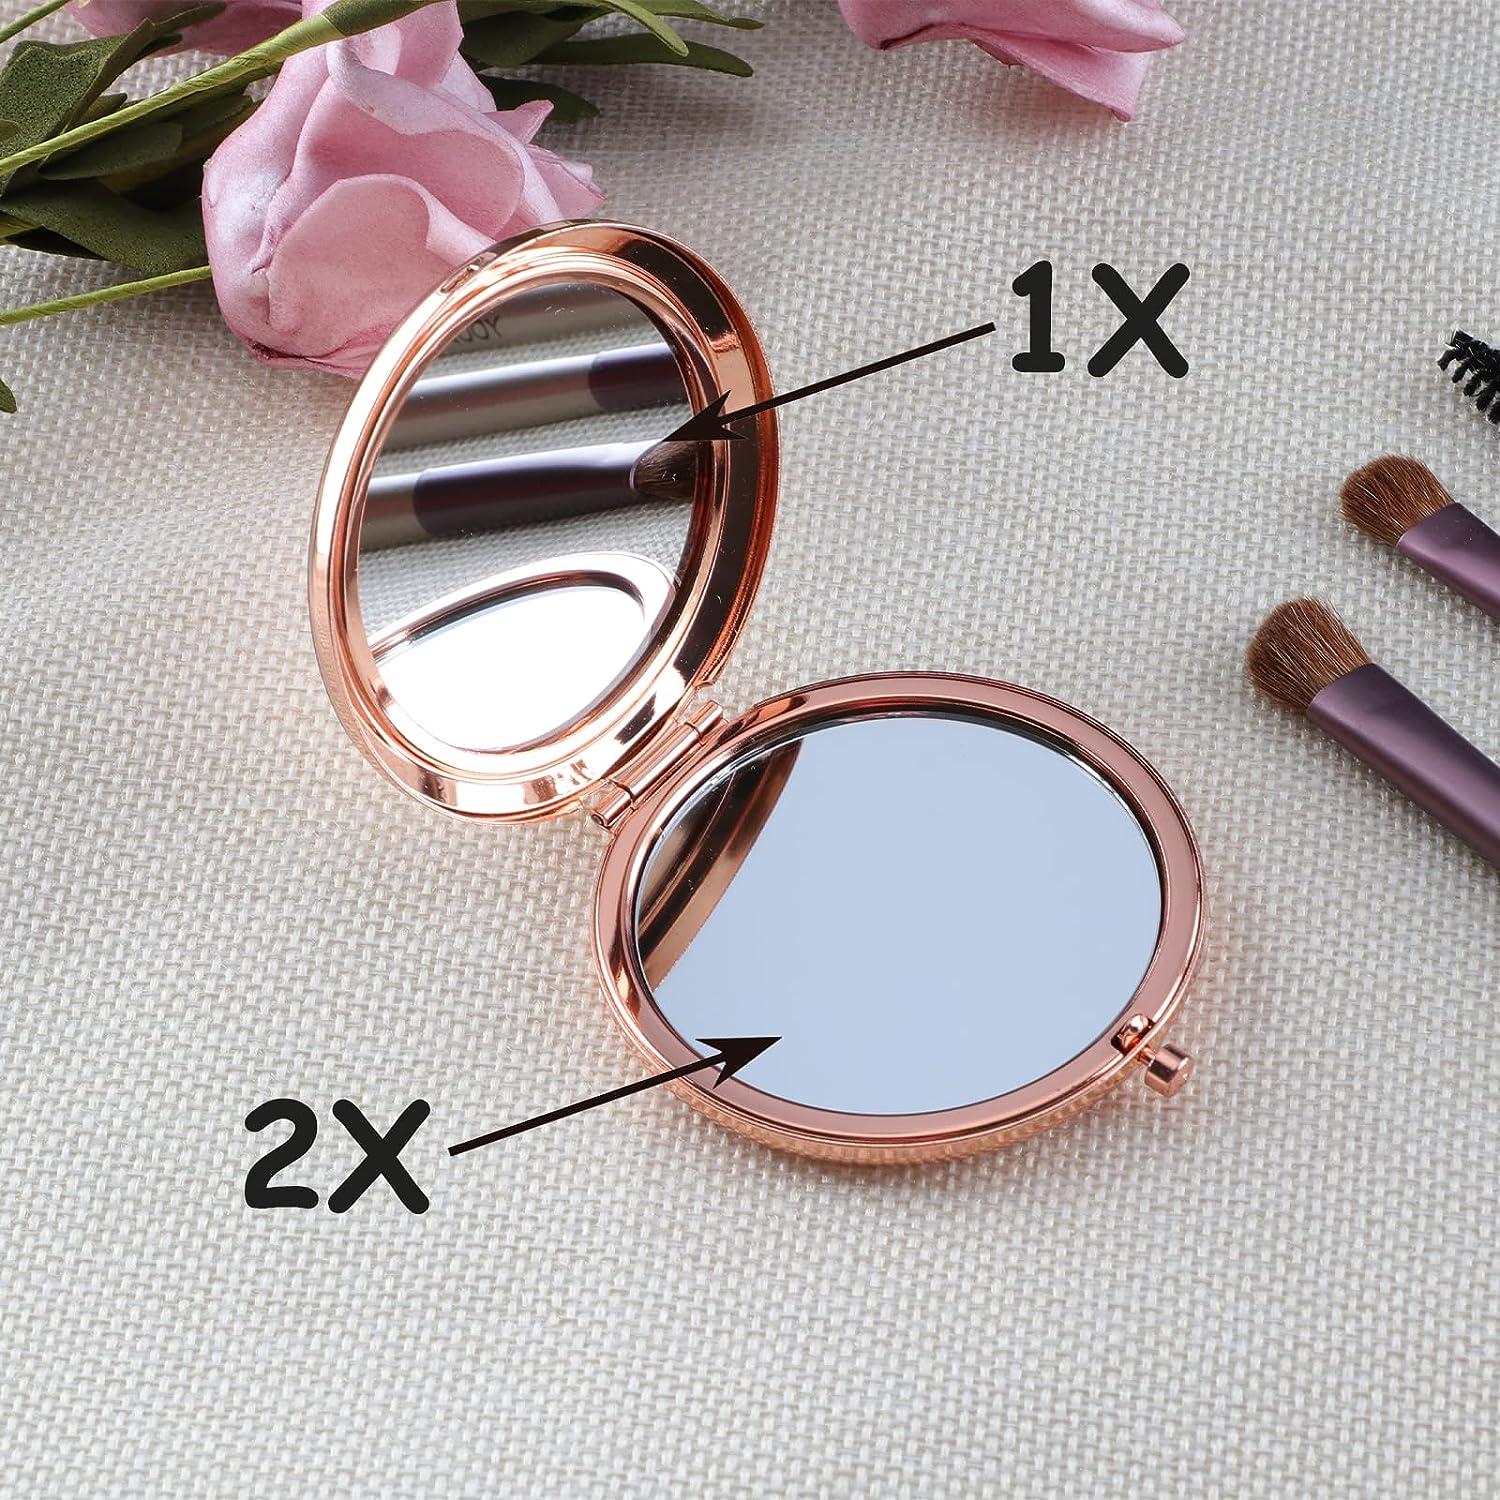 Cawnefil 50th Birthday Gifts for Women Rose Gold Compact Makeup Mirror  Happy 50 Years Old Birthday